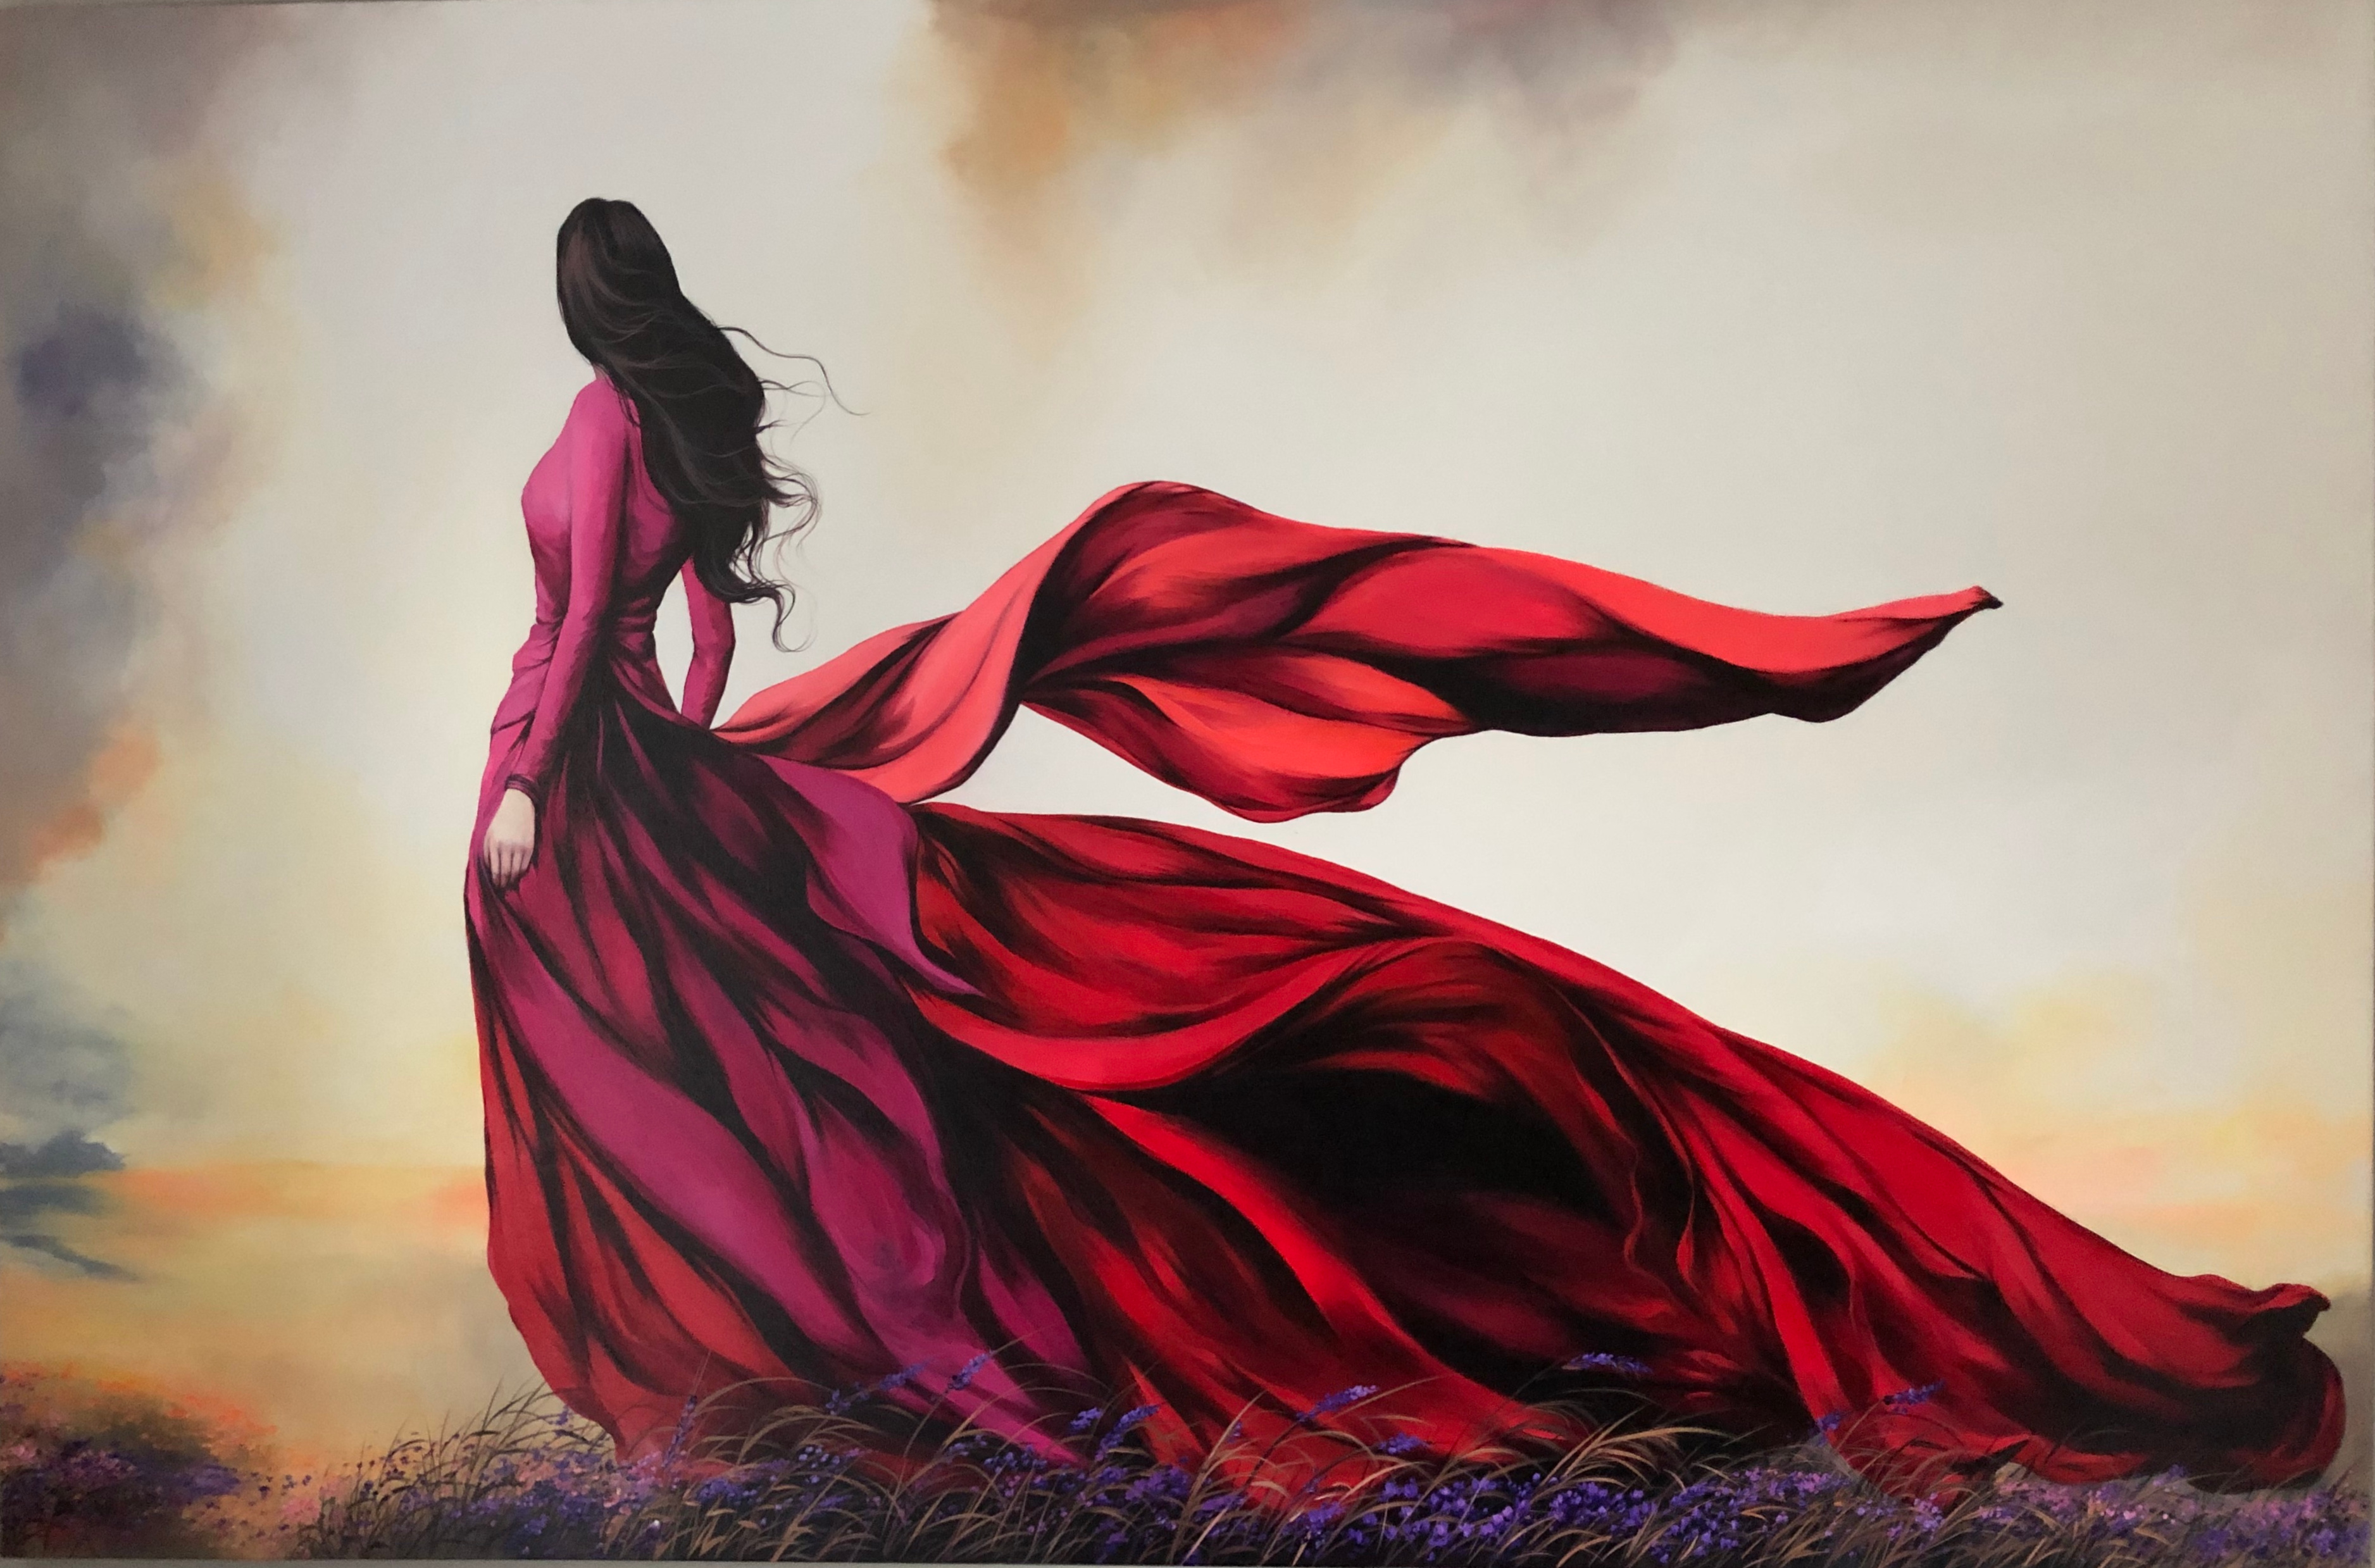 Fembot in a Red Dress About | The Red Dress Effect Lady in the Red Dress - ...